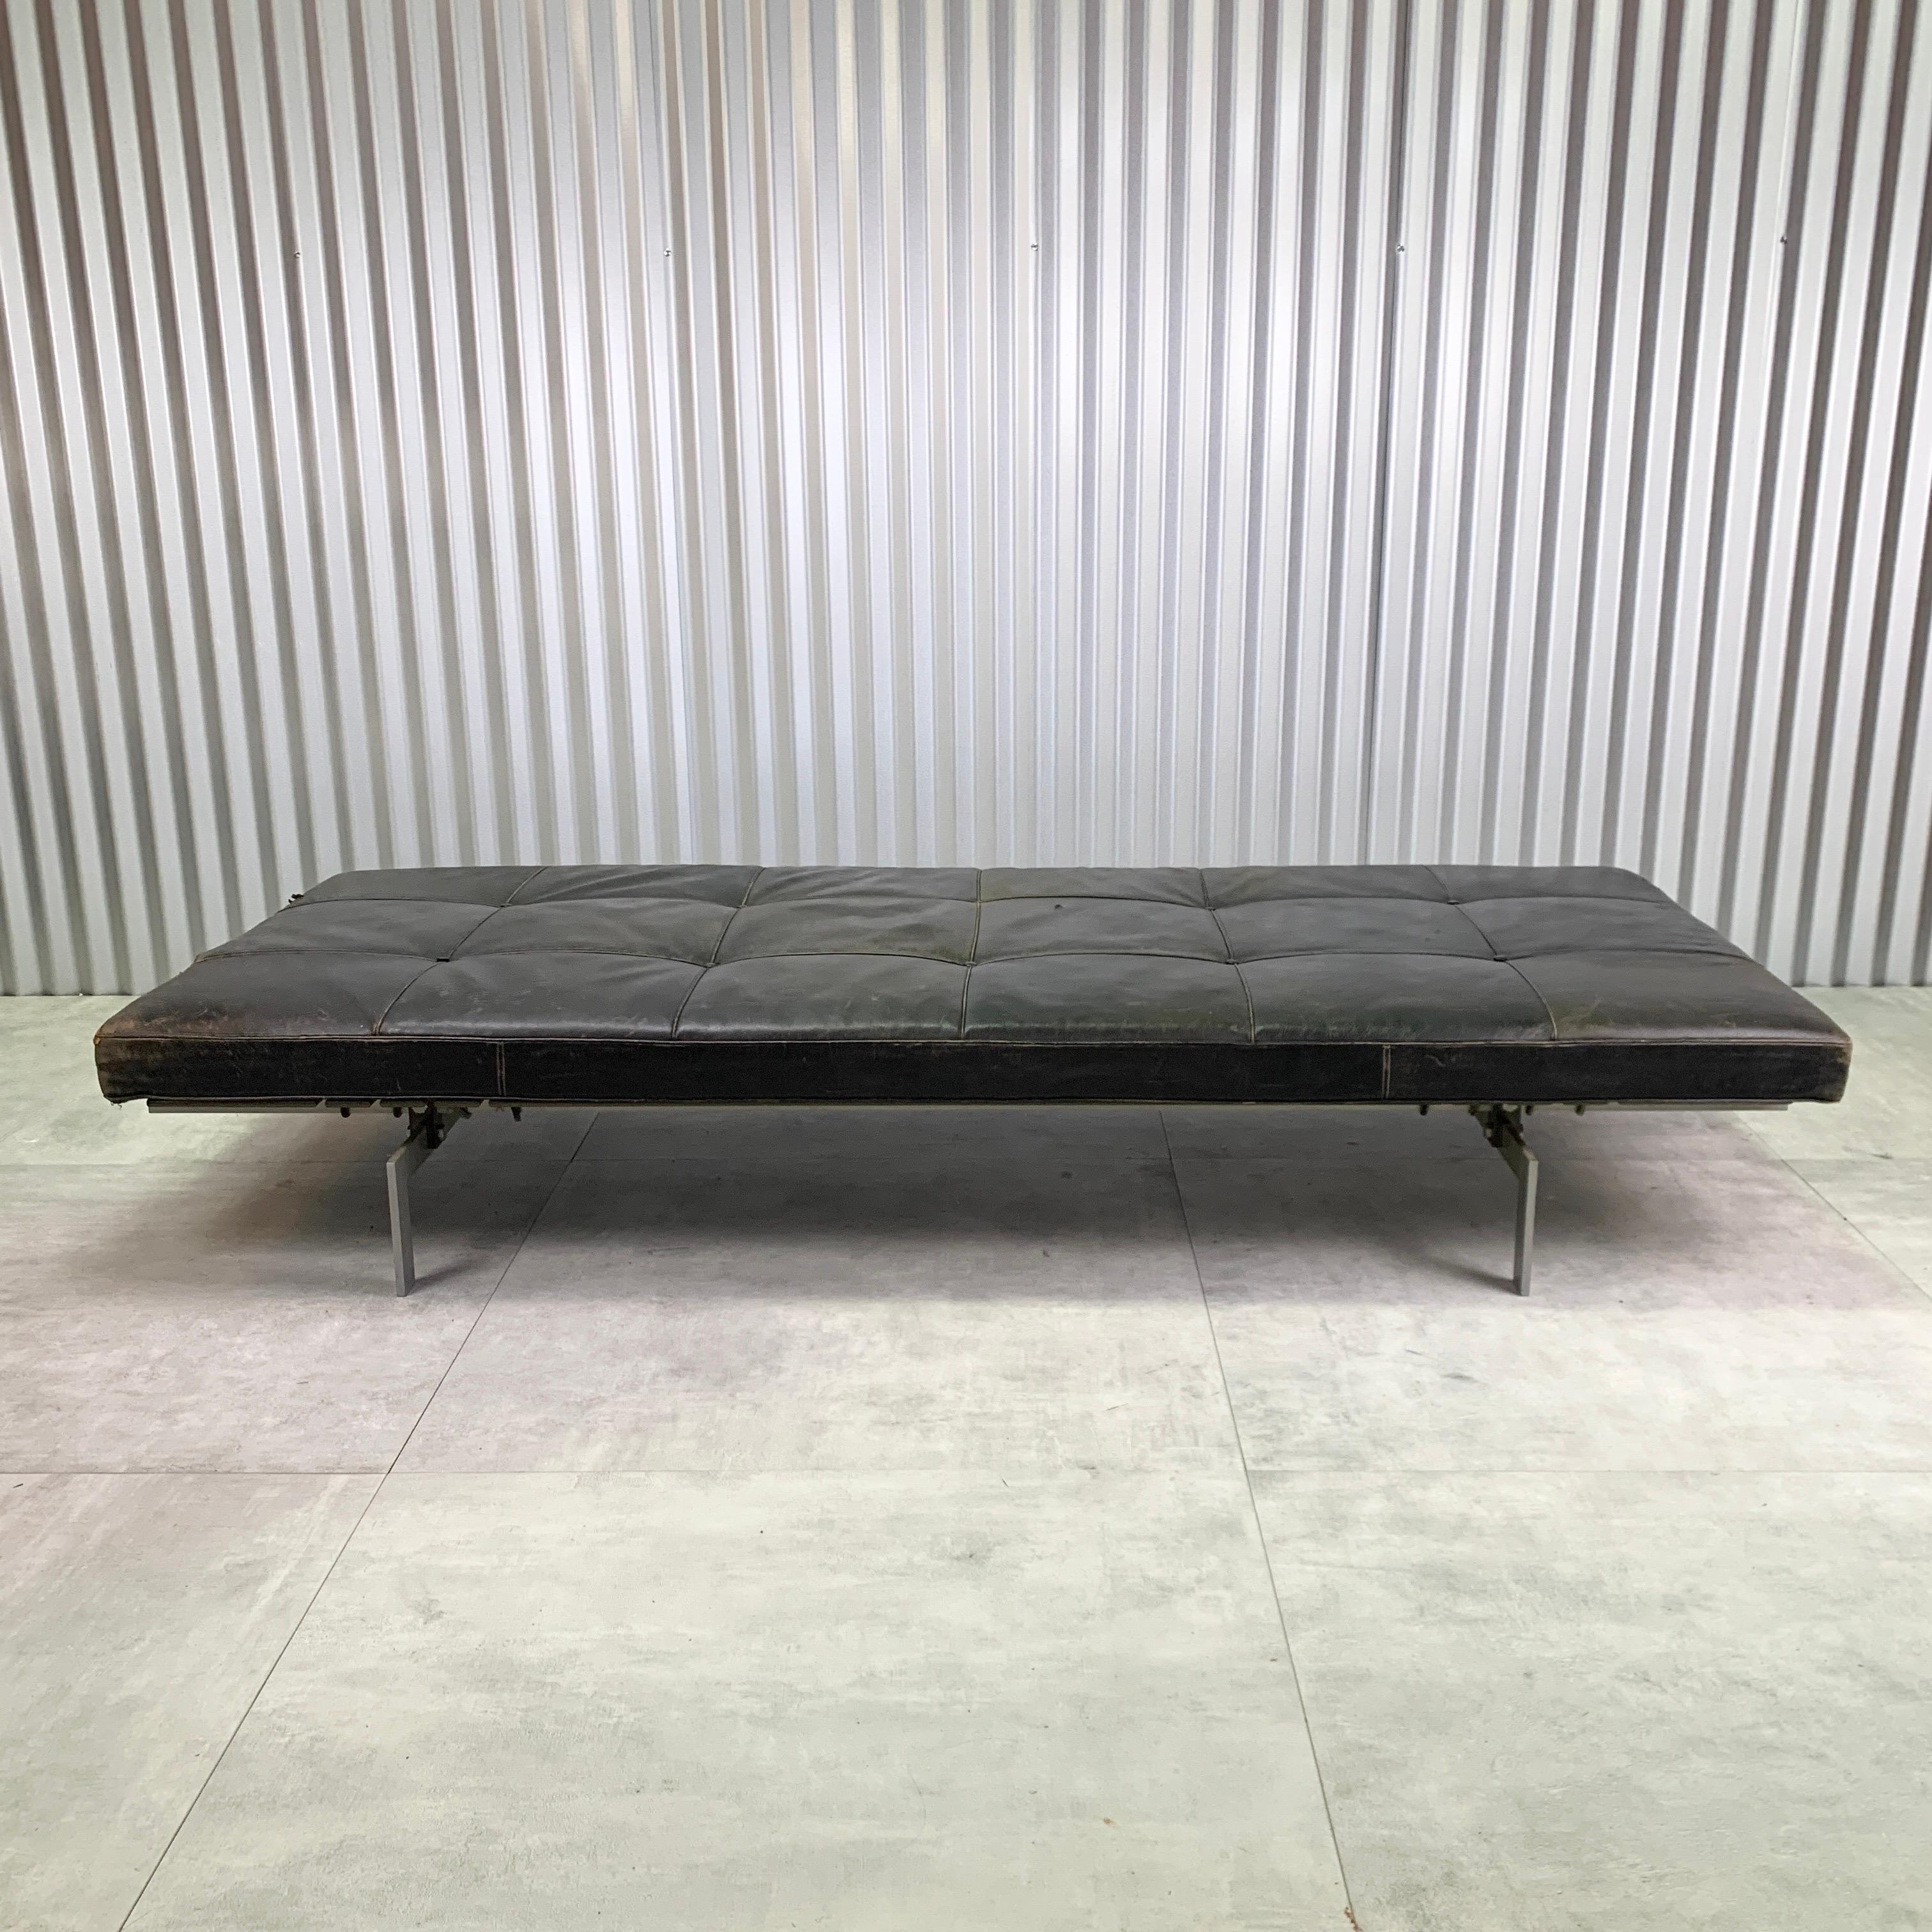 Incredible as-found Poul Kjaerholm PK 80 daybed for E Kold Christiansen in original as found condition. Heavy patina and wear adding charm and uniqueness. Could be professionally restored but something seems rather authentic about the consition as